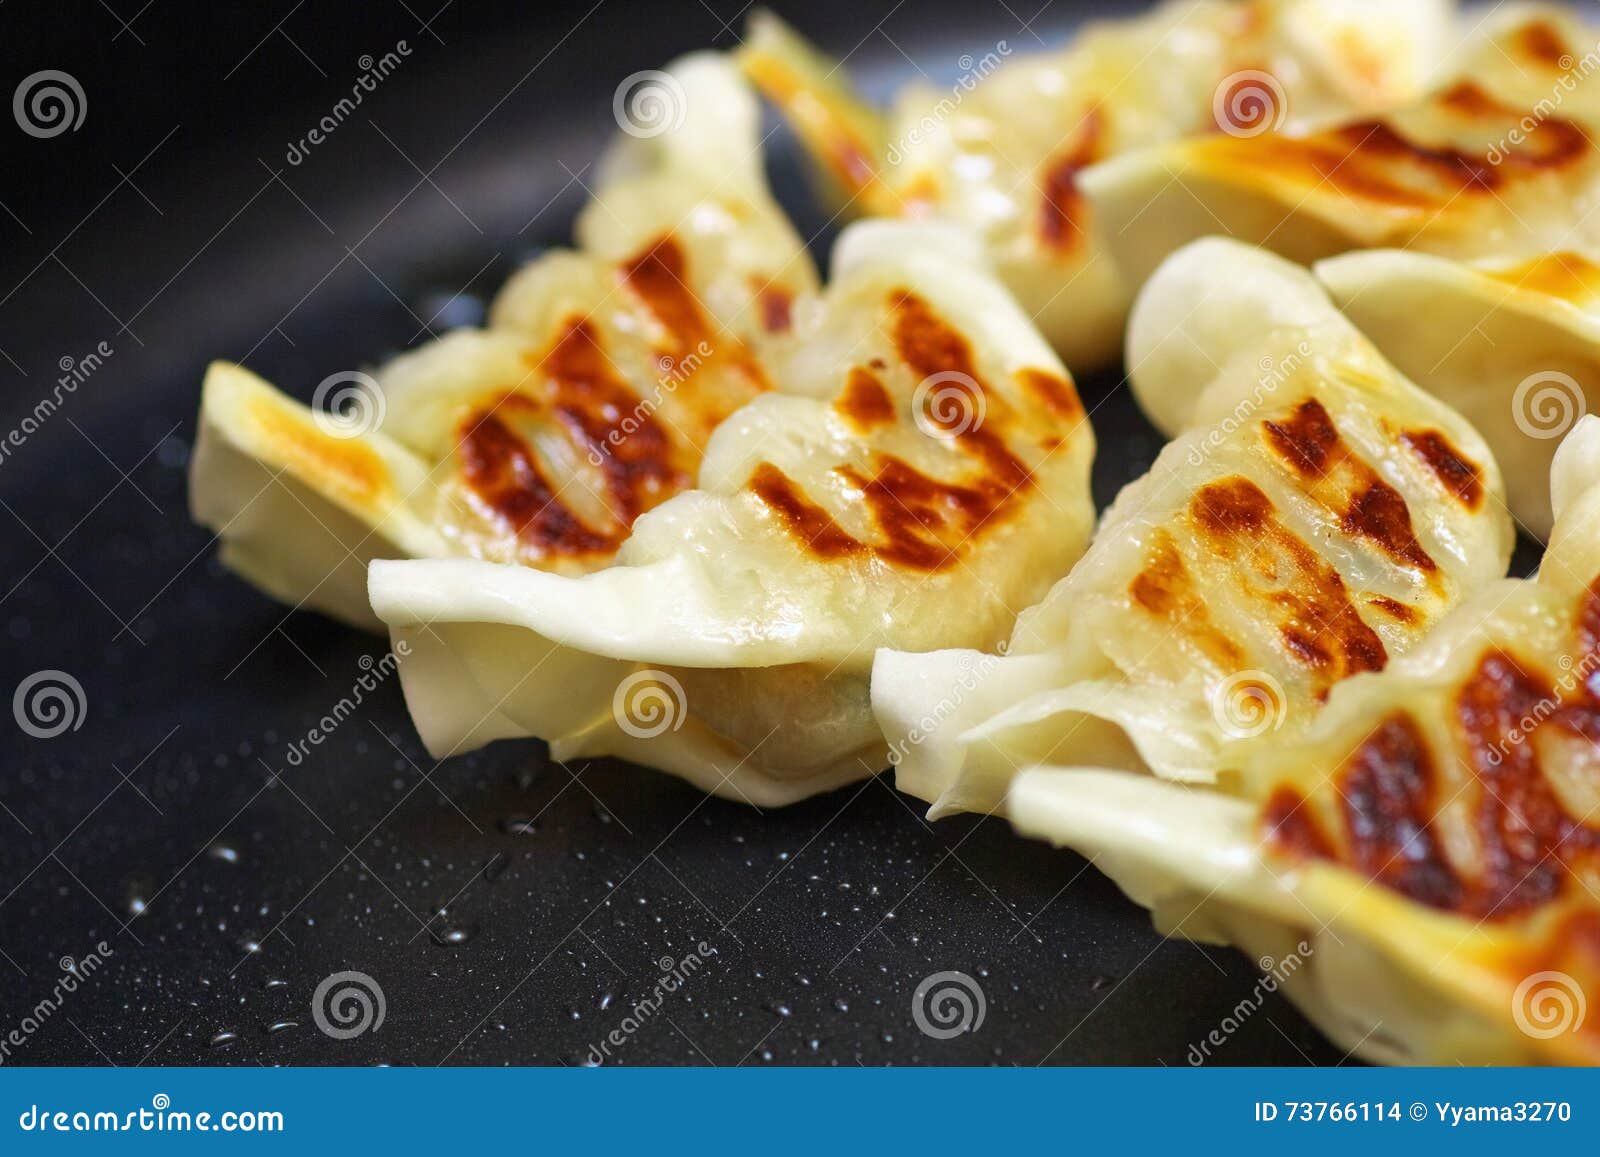 close up of chinese fried dumplings on a frying pan.